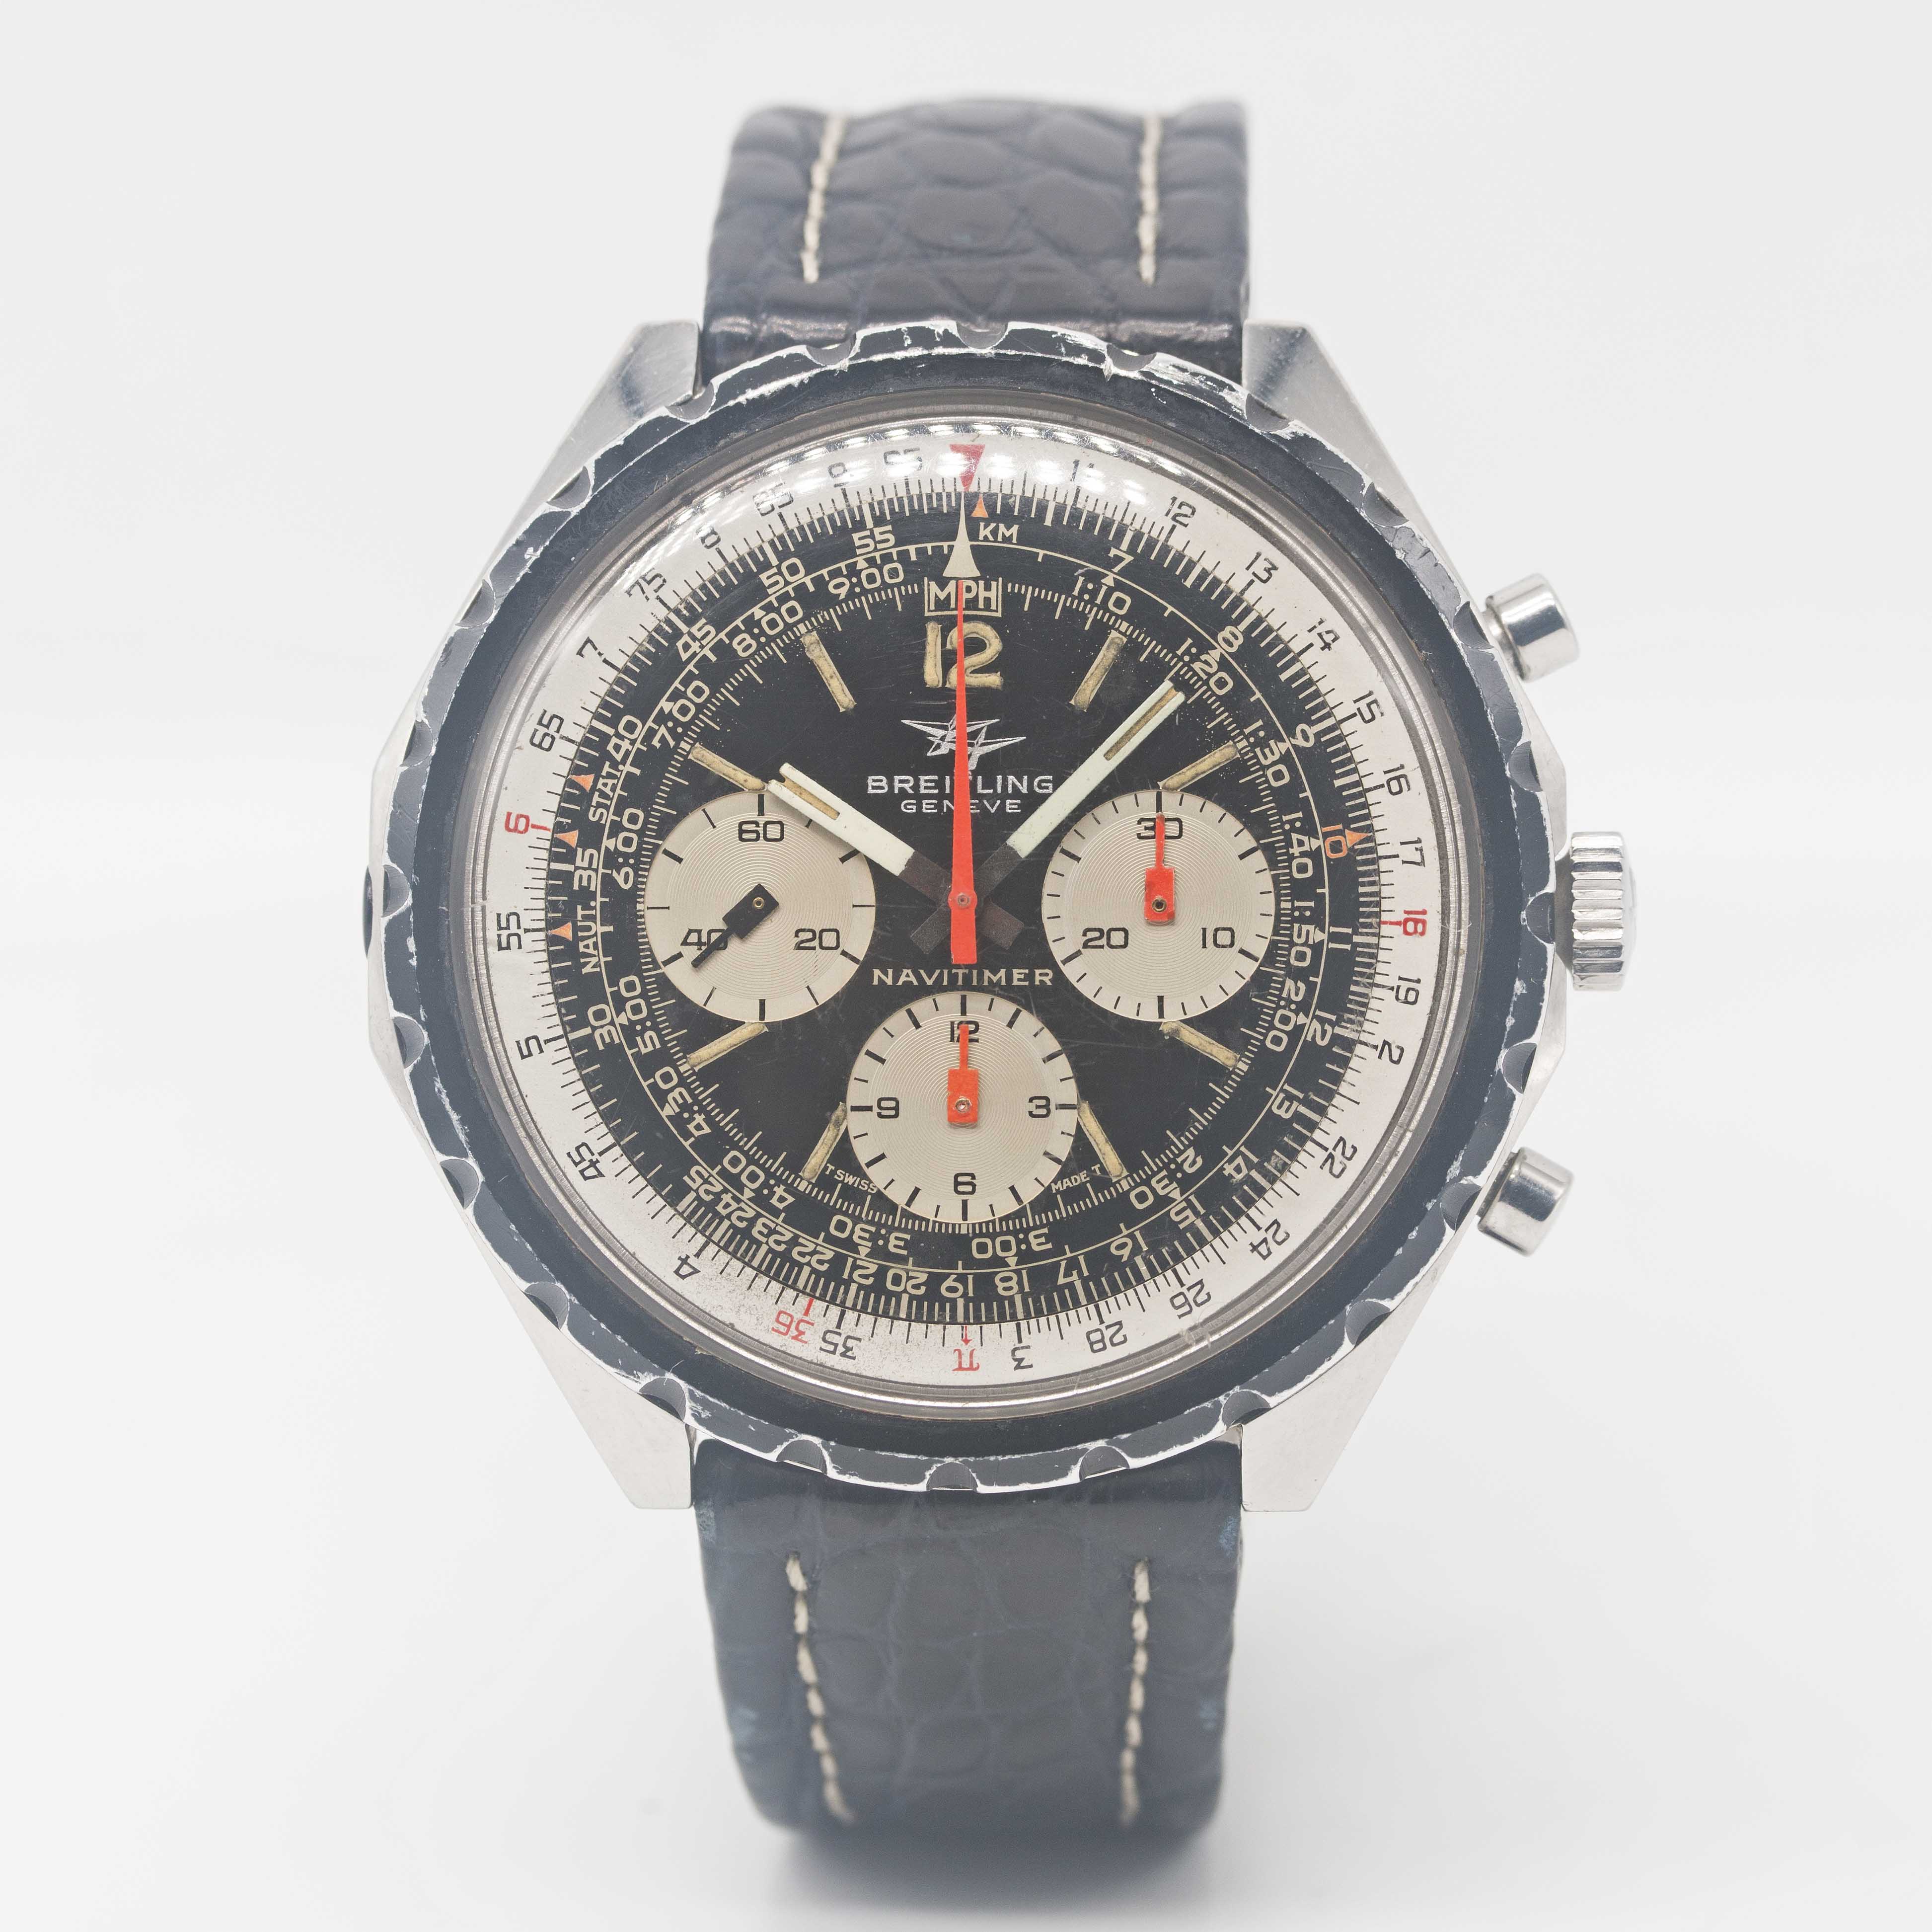 A GENTLEMAN'S STAINLESS STEEL BREITLING NAVITIMER CHRONOGRAPH WRIST WATCH CIRCA 1968, REF. 0816 - Image 2 of 7